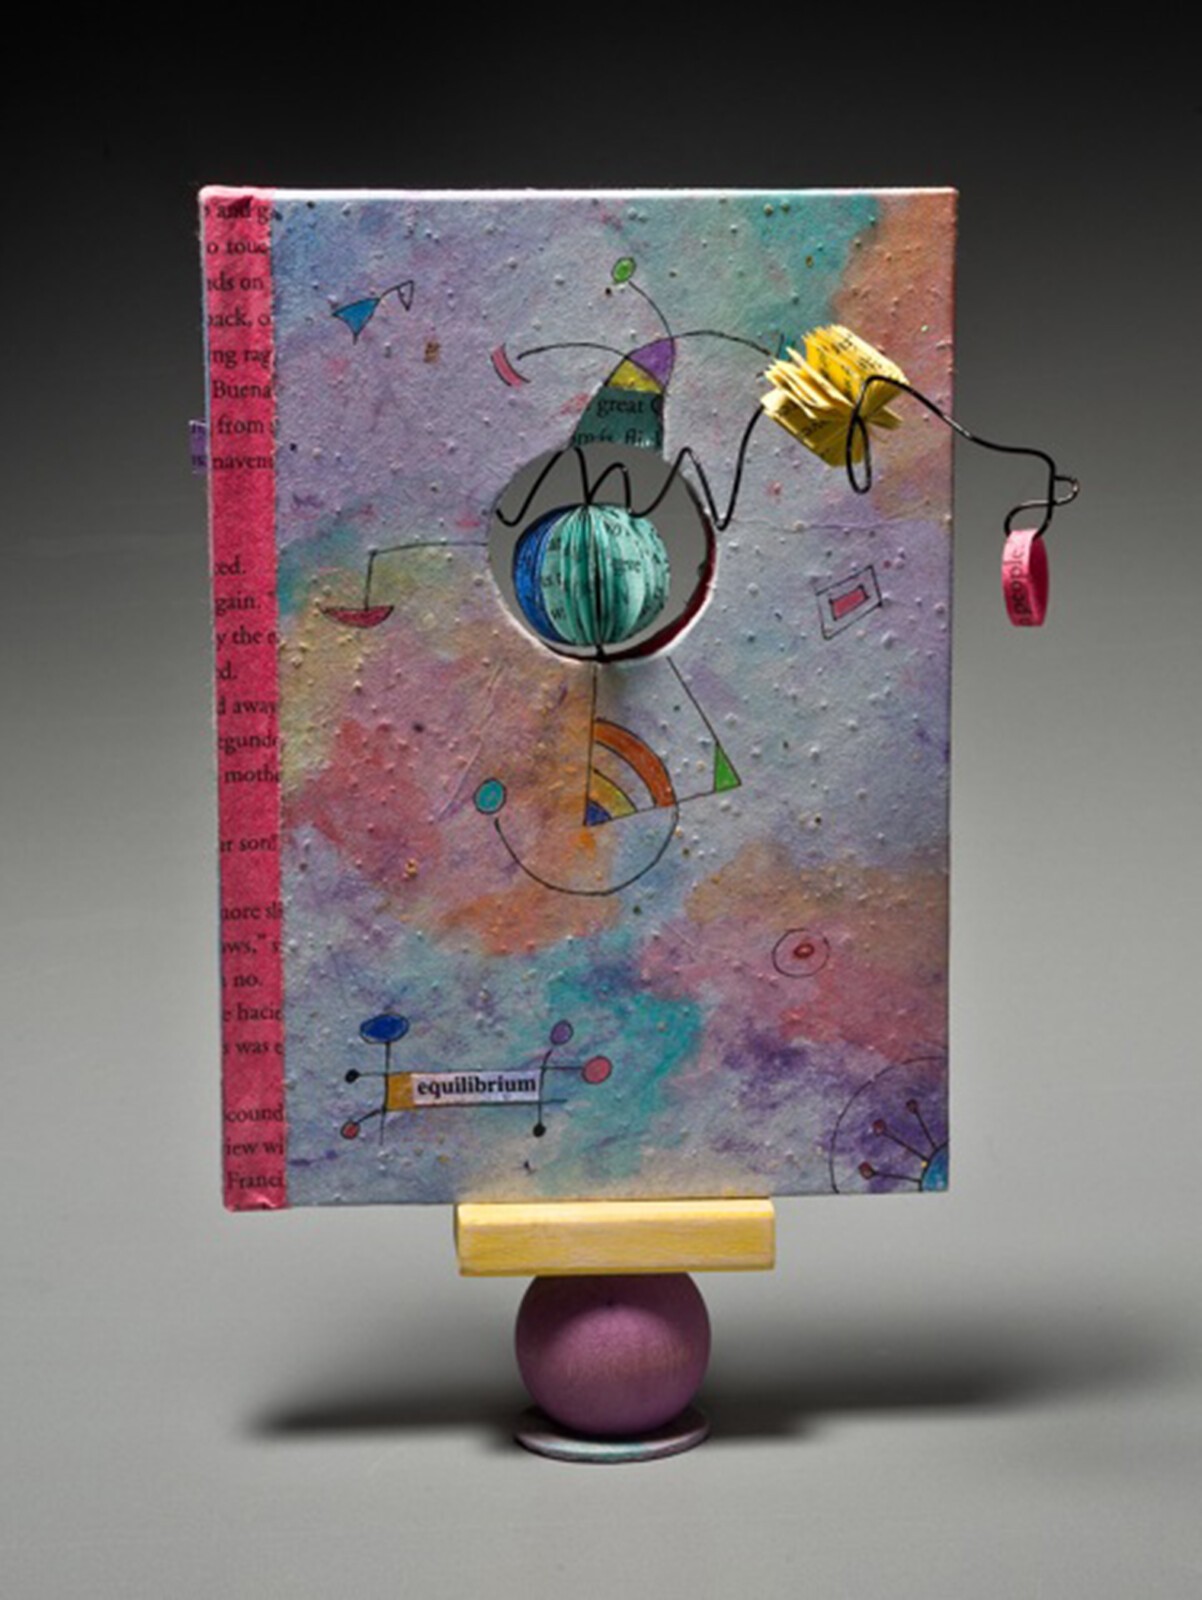 Jean-Marie Tarascio, The Art of Hanging in the Balance, Altered discarded book, acrylics, wood